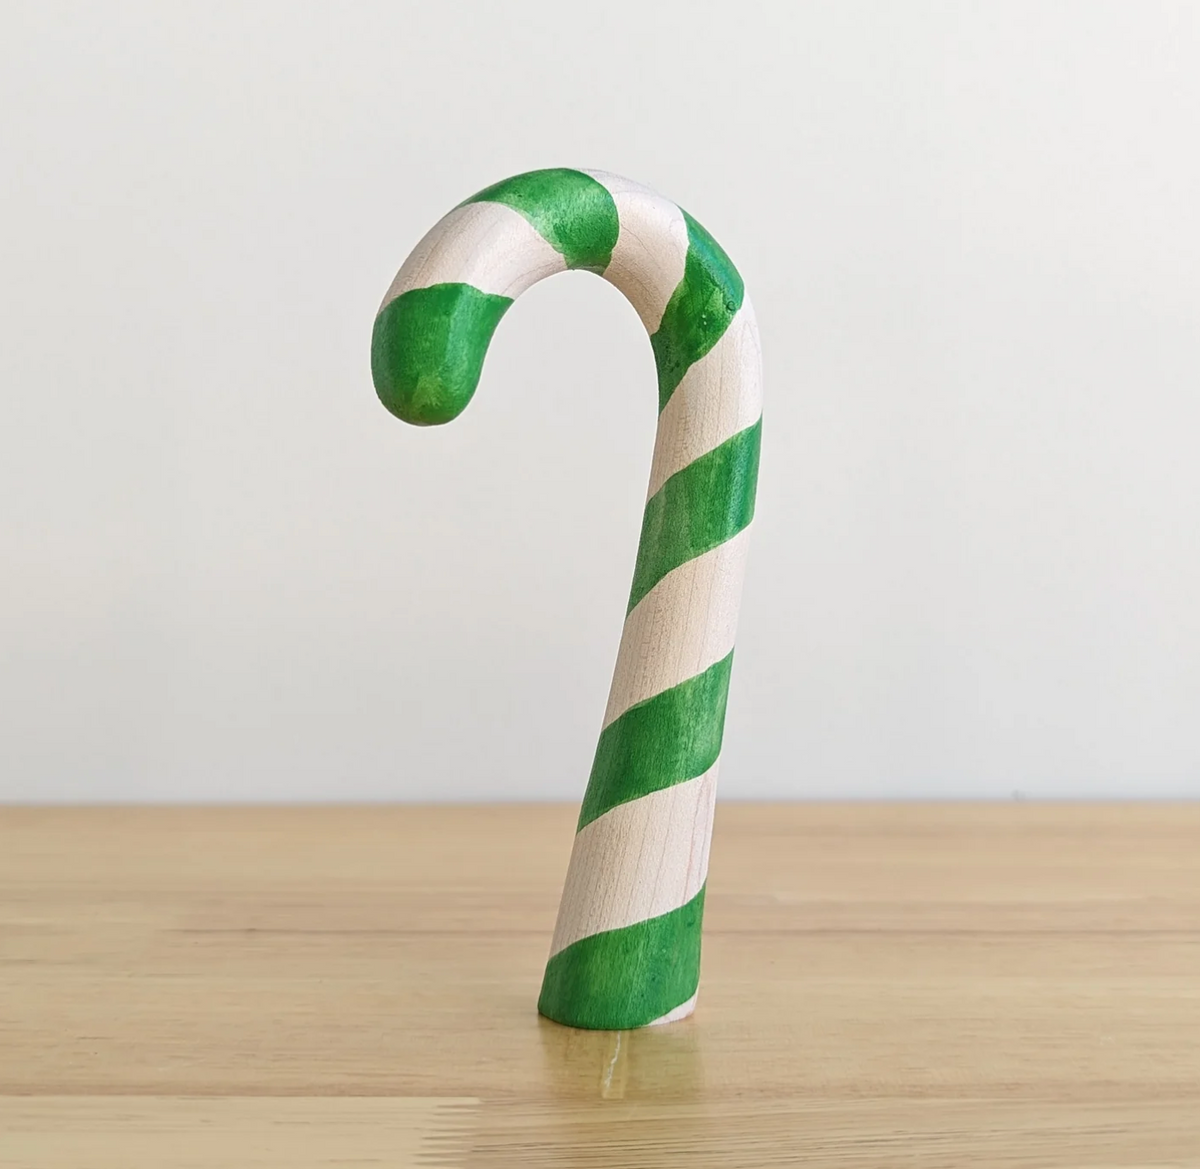 NOM // Wooden Candy Cane